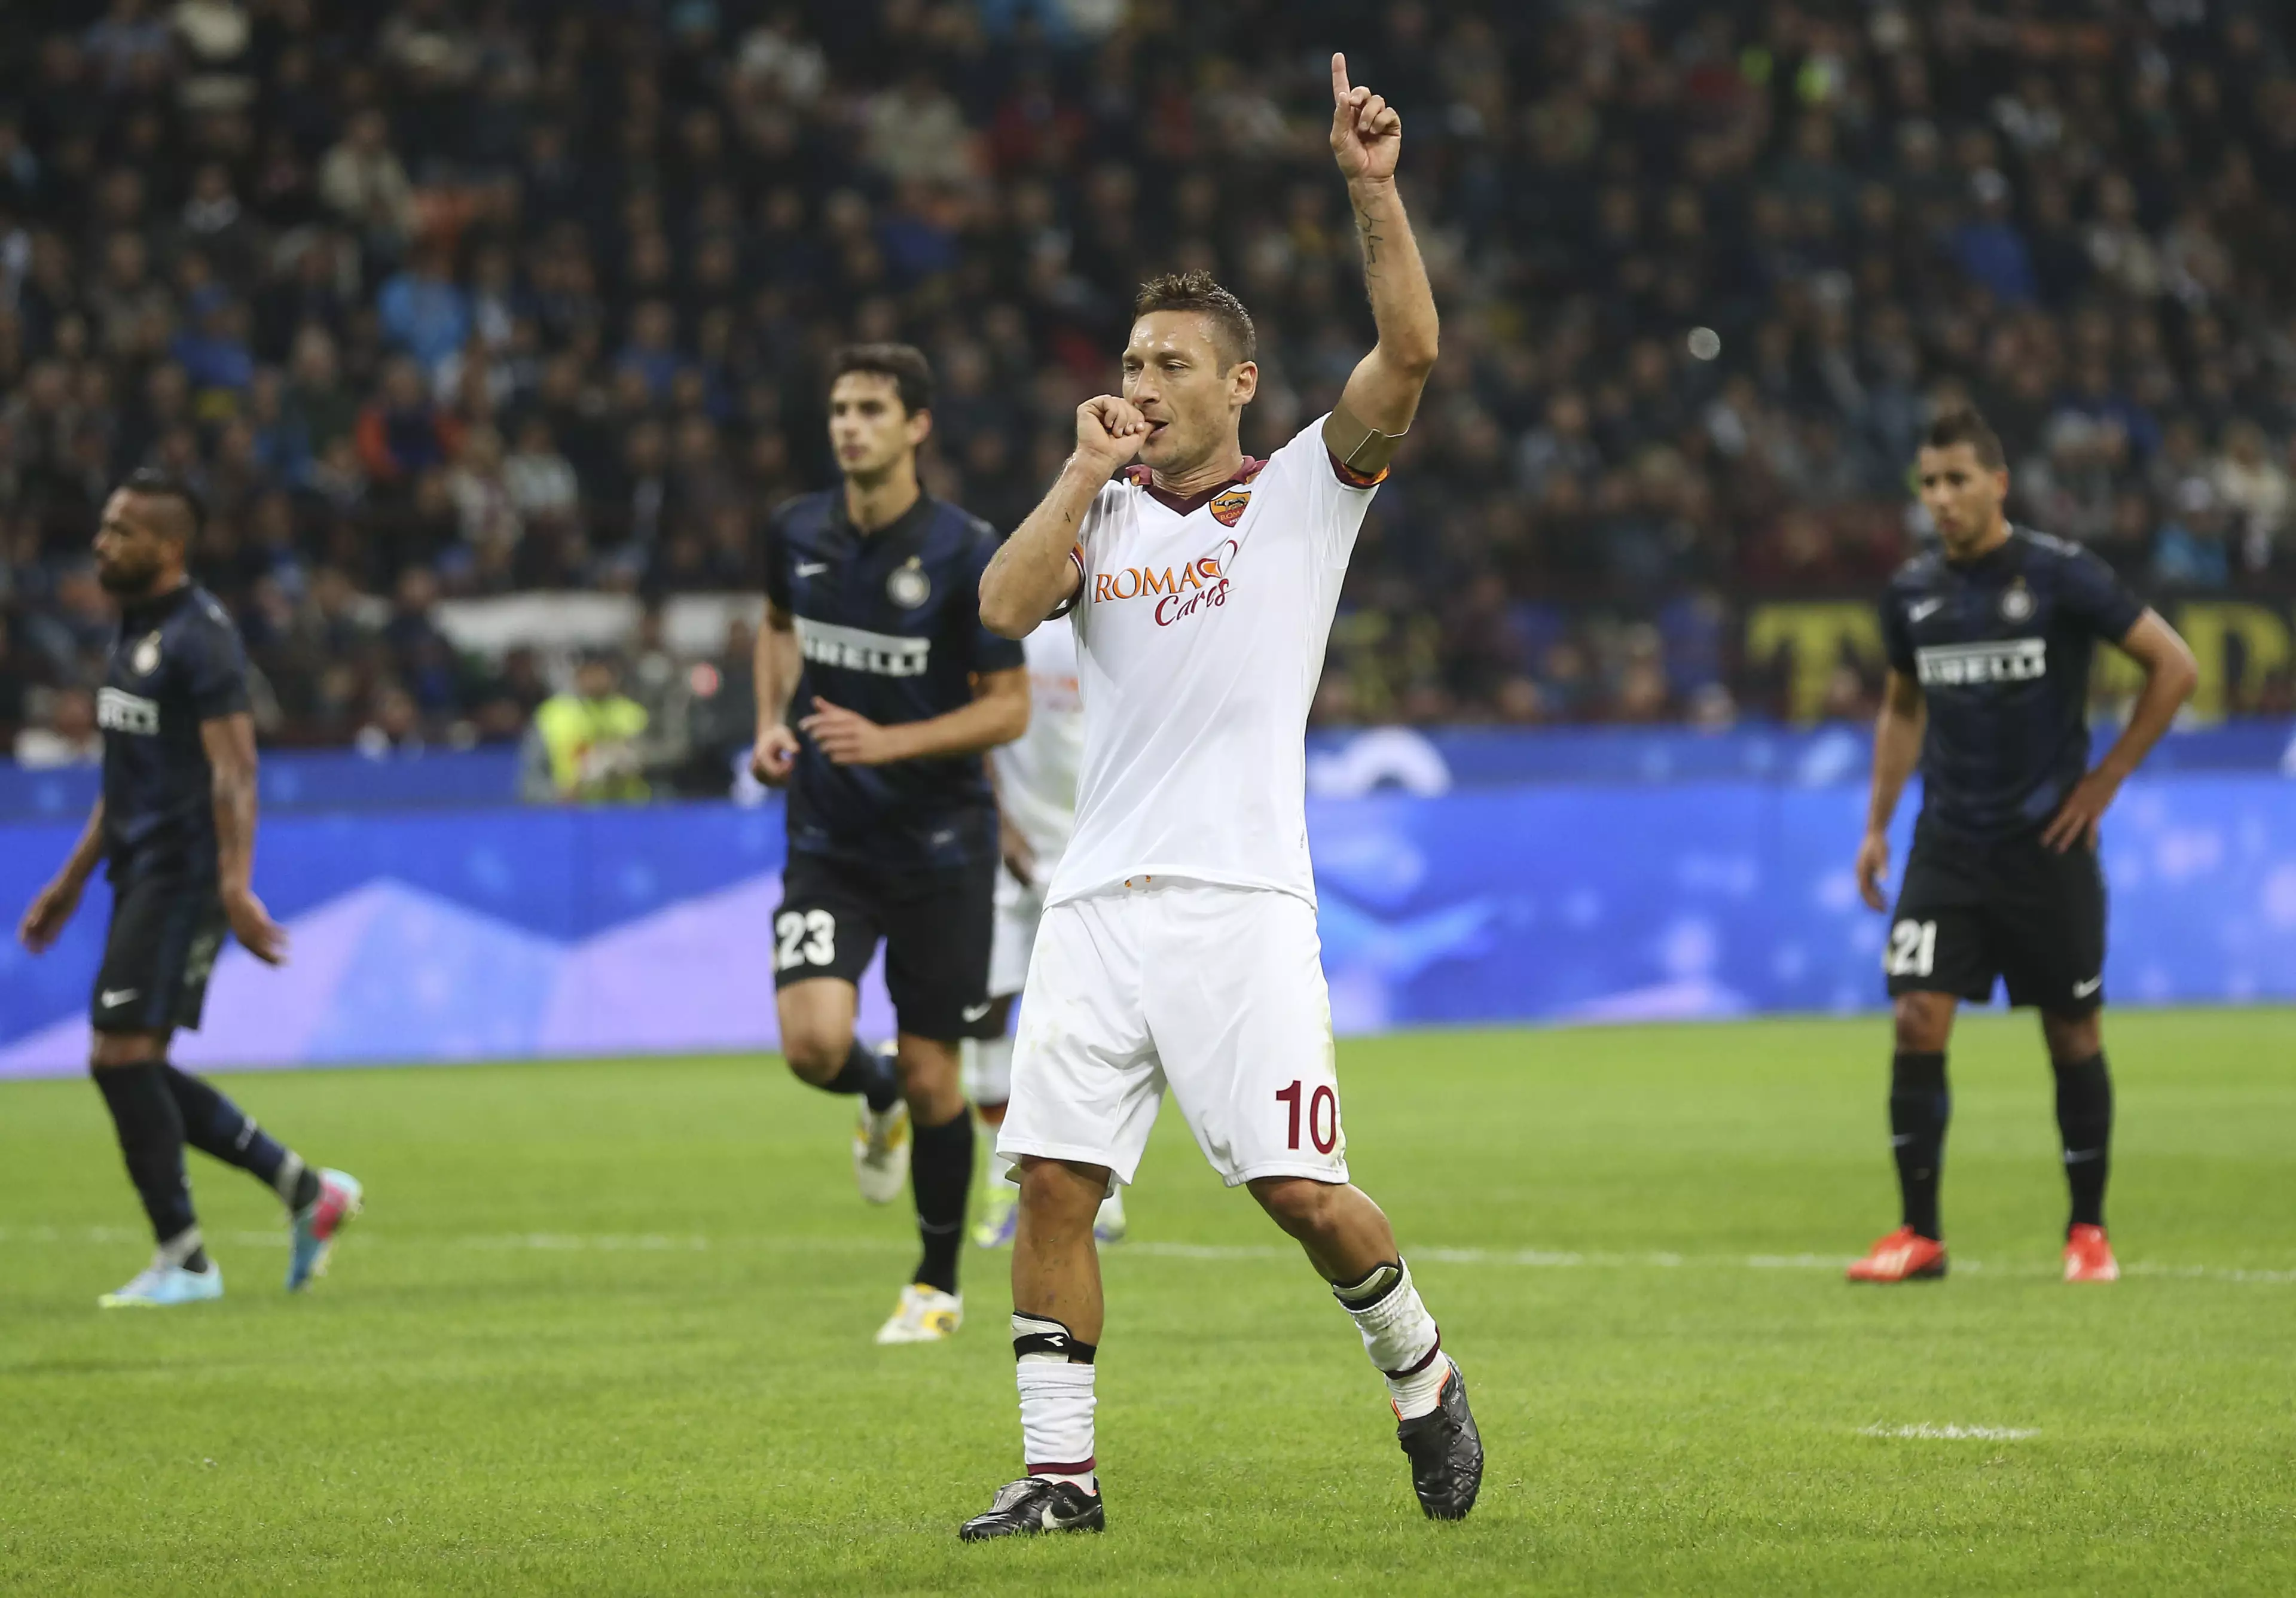 Totti Could Be On His Way To The Premier League